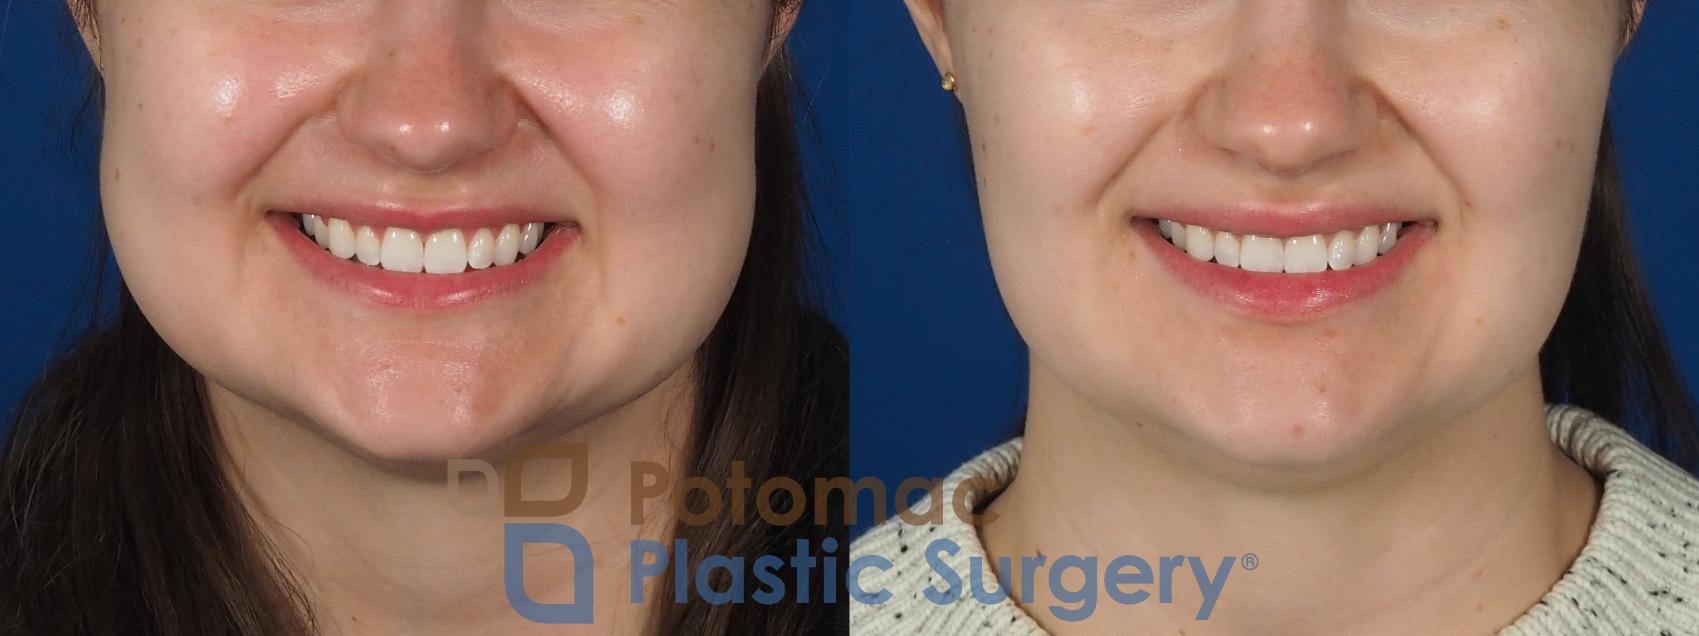 Before & After Facial Sculpting Case 277 Front Smiling View in Washington, DC